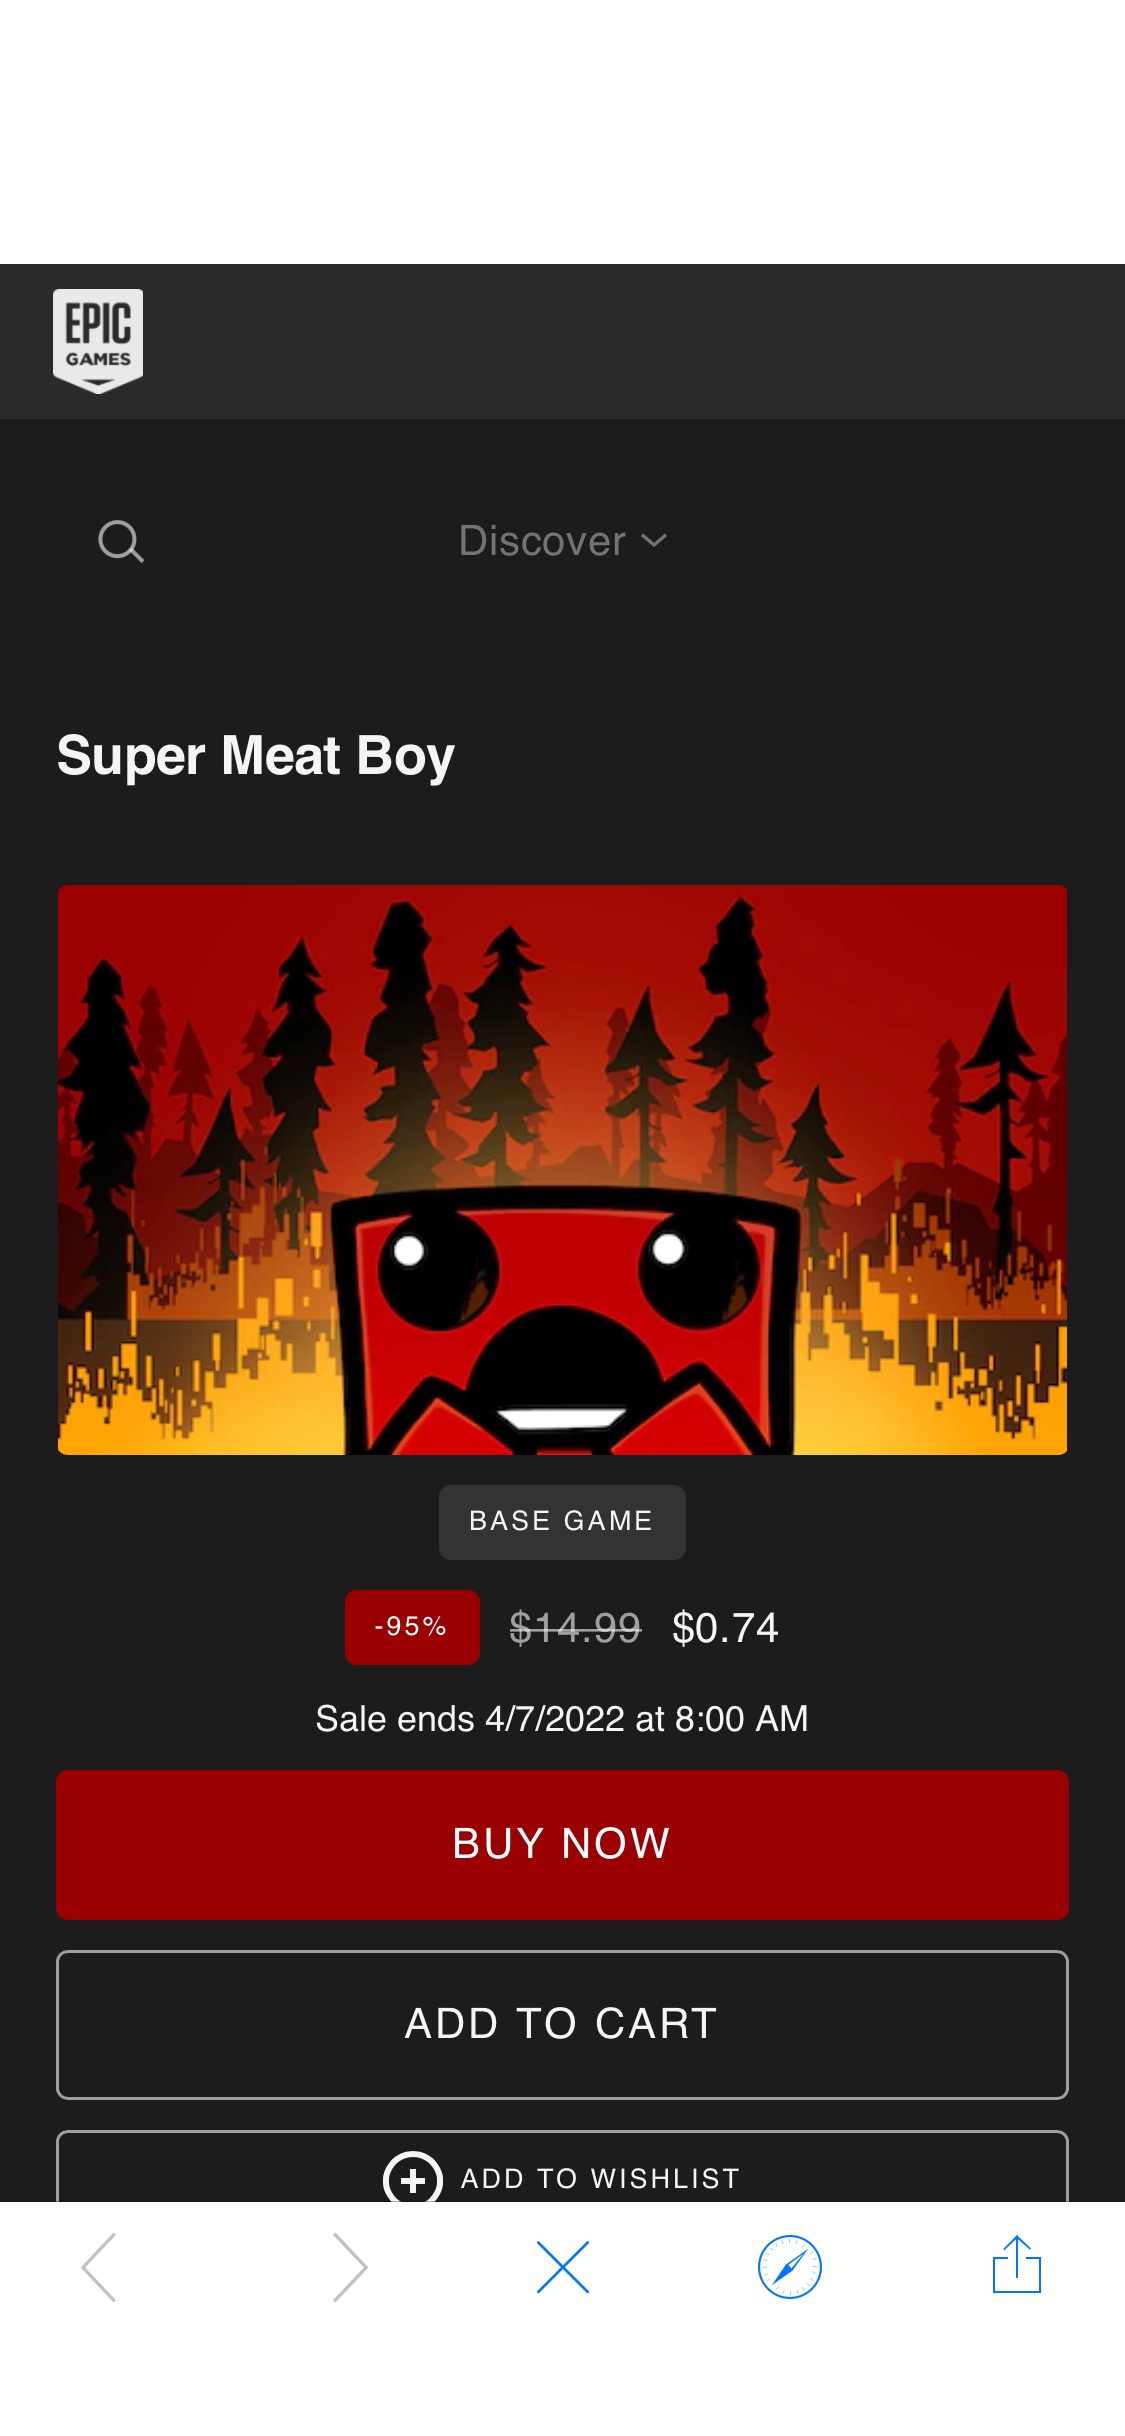 Super Meat Boy | Download and Buy Today - Epic Games Store 游戏